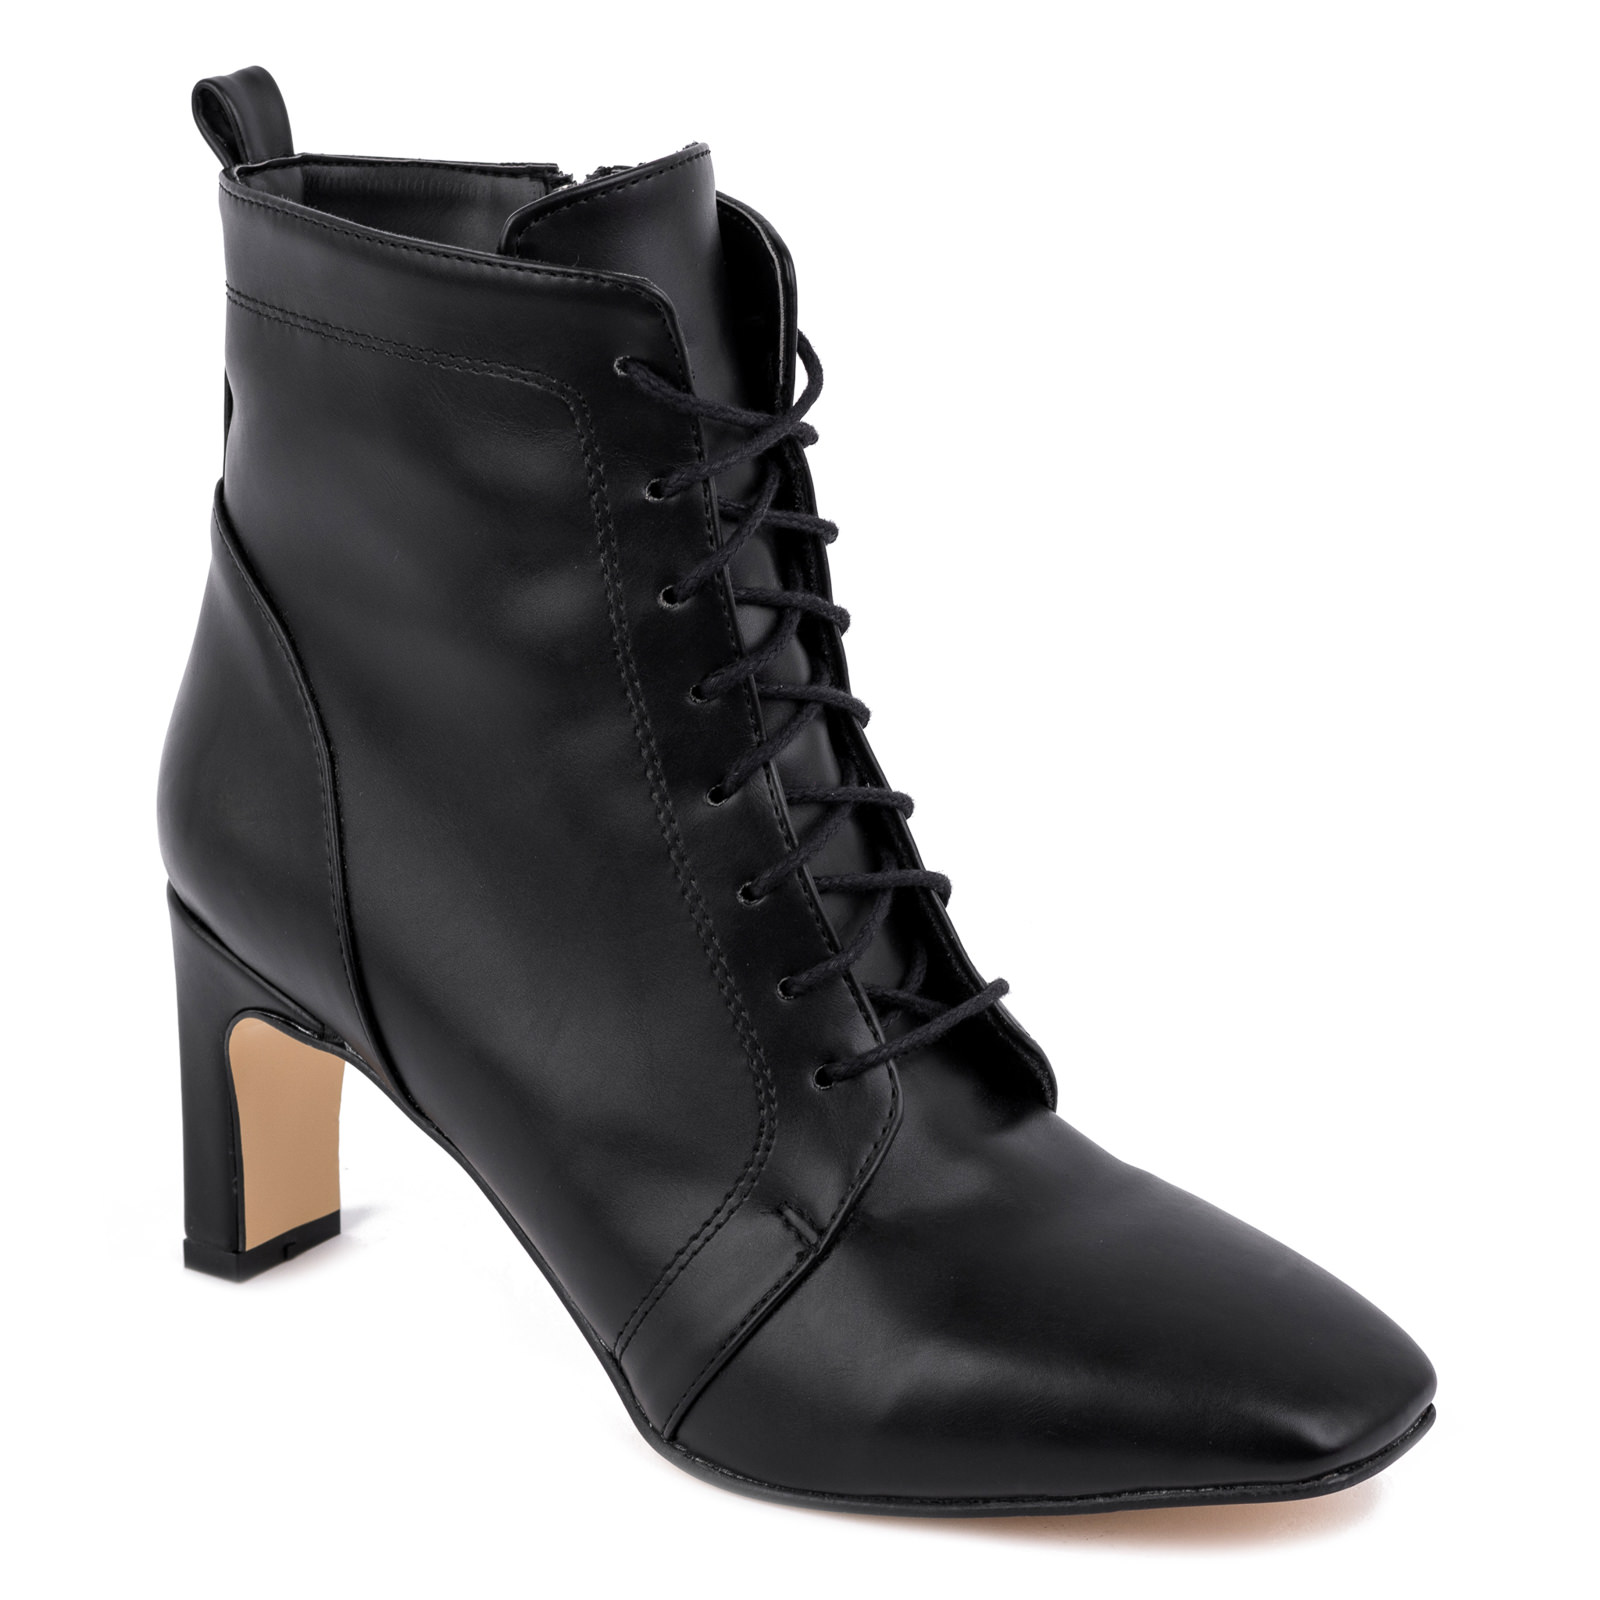 LACE UP ANKLE BOOTS WITH BLOCK HEEL - BLACK